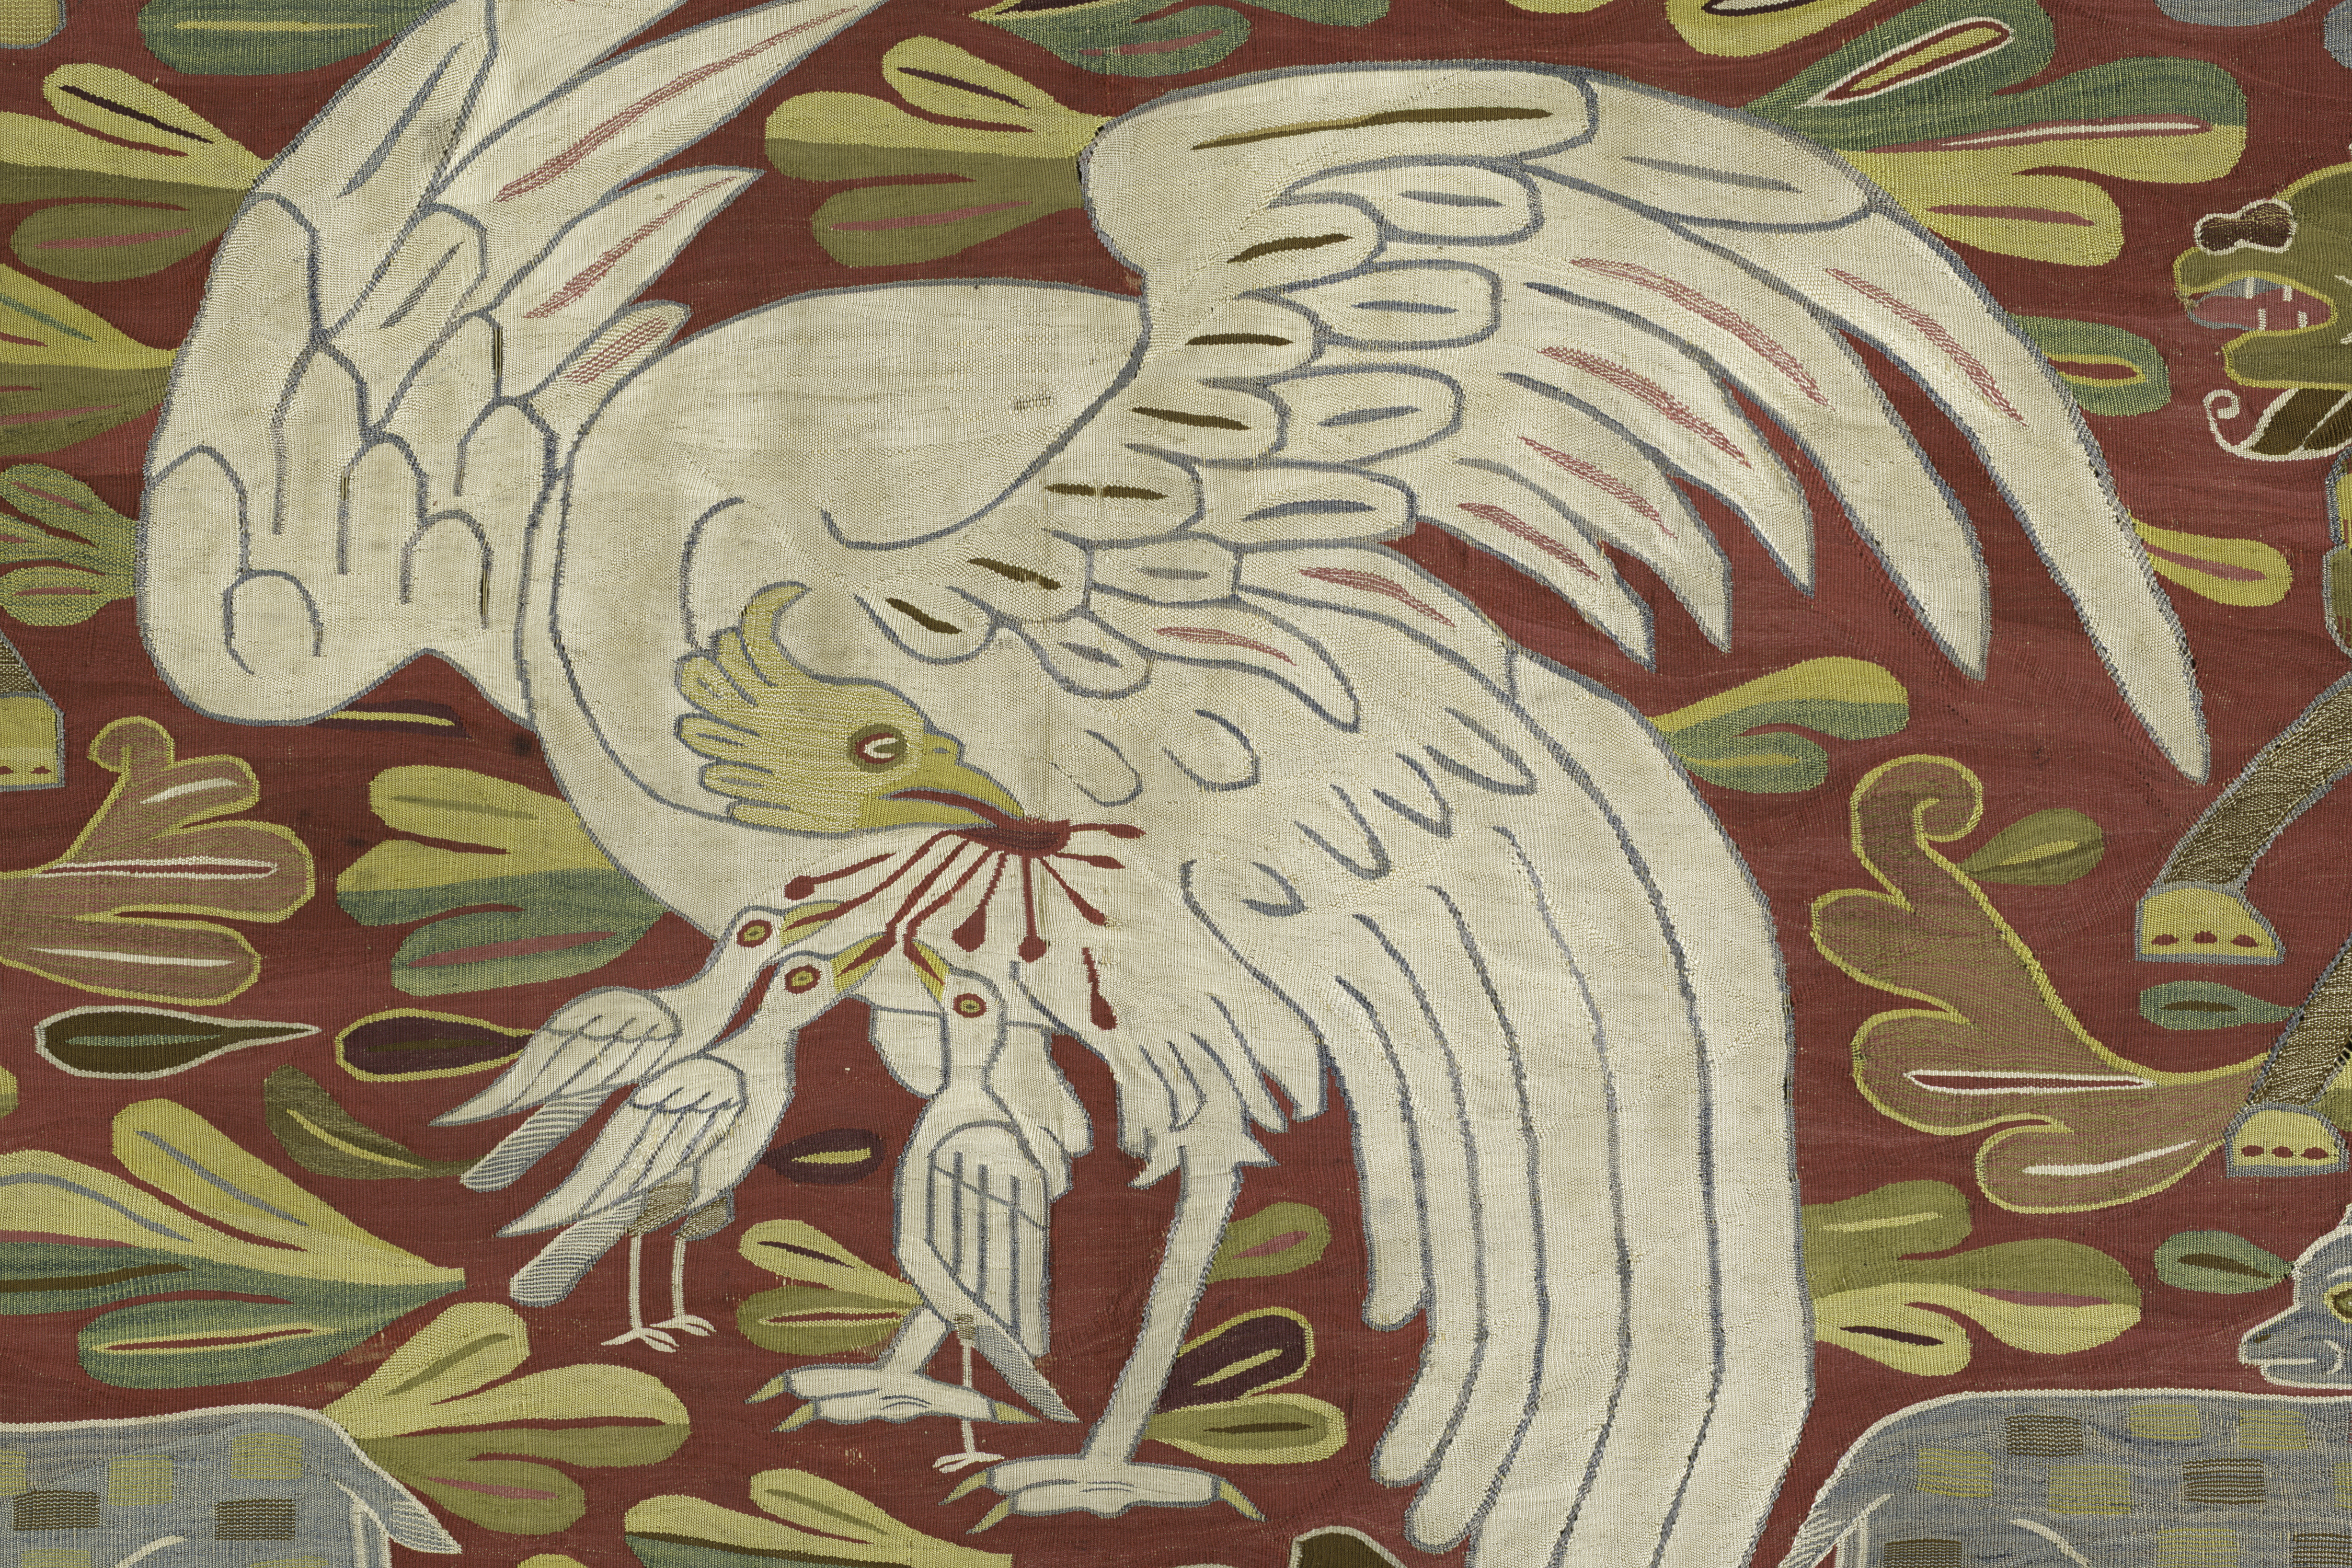 Tapestry with Pelican, detail, late 17th-early 18th century (Textile Museum, Washington, DC)